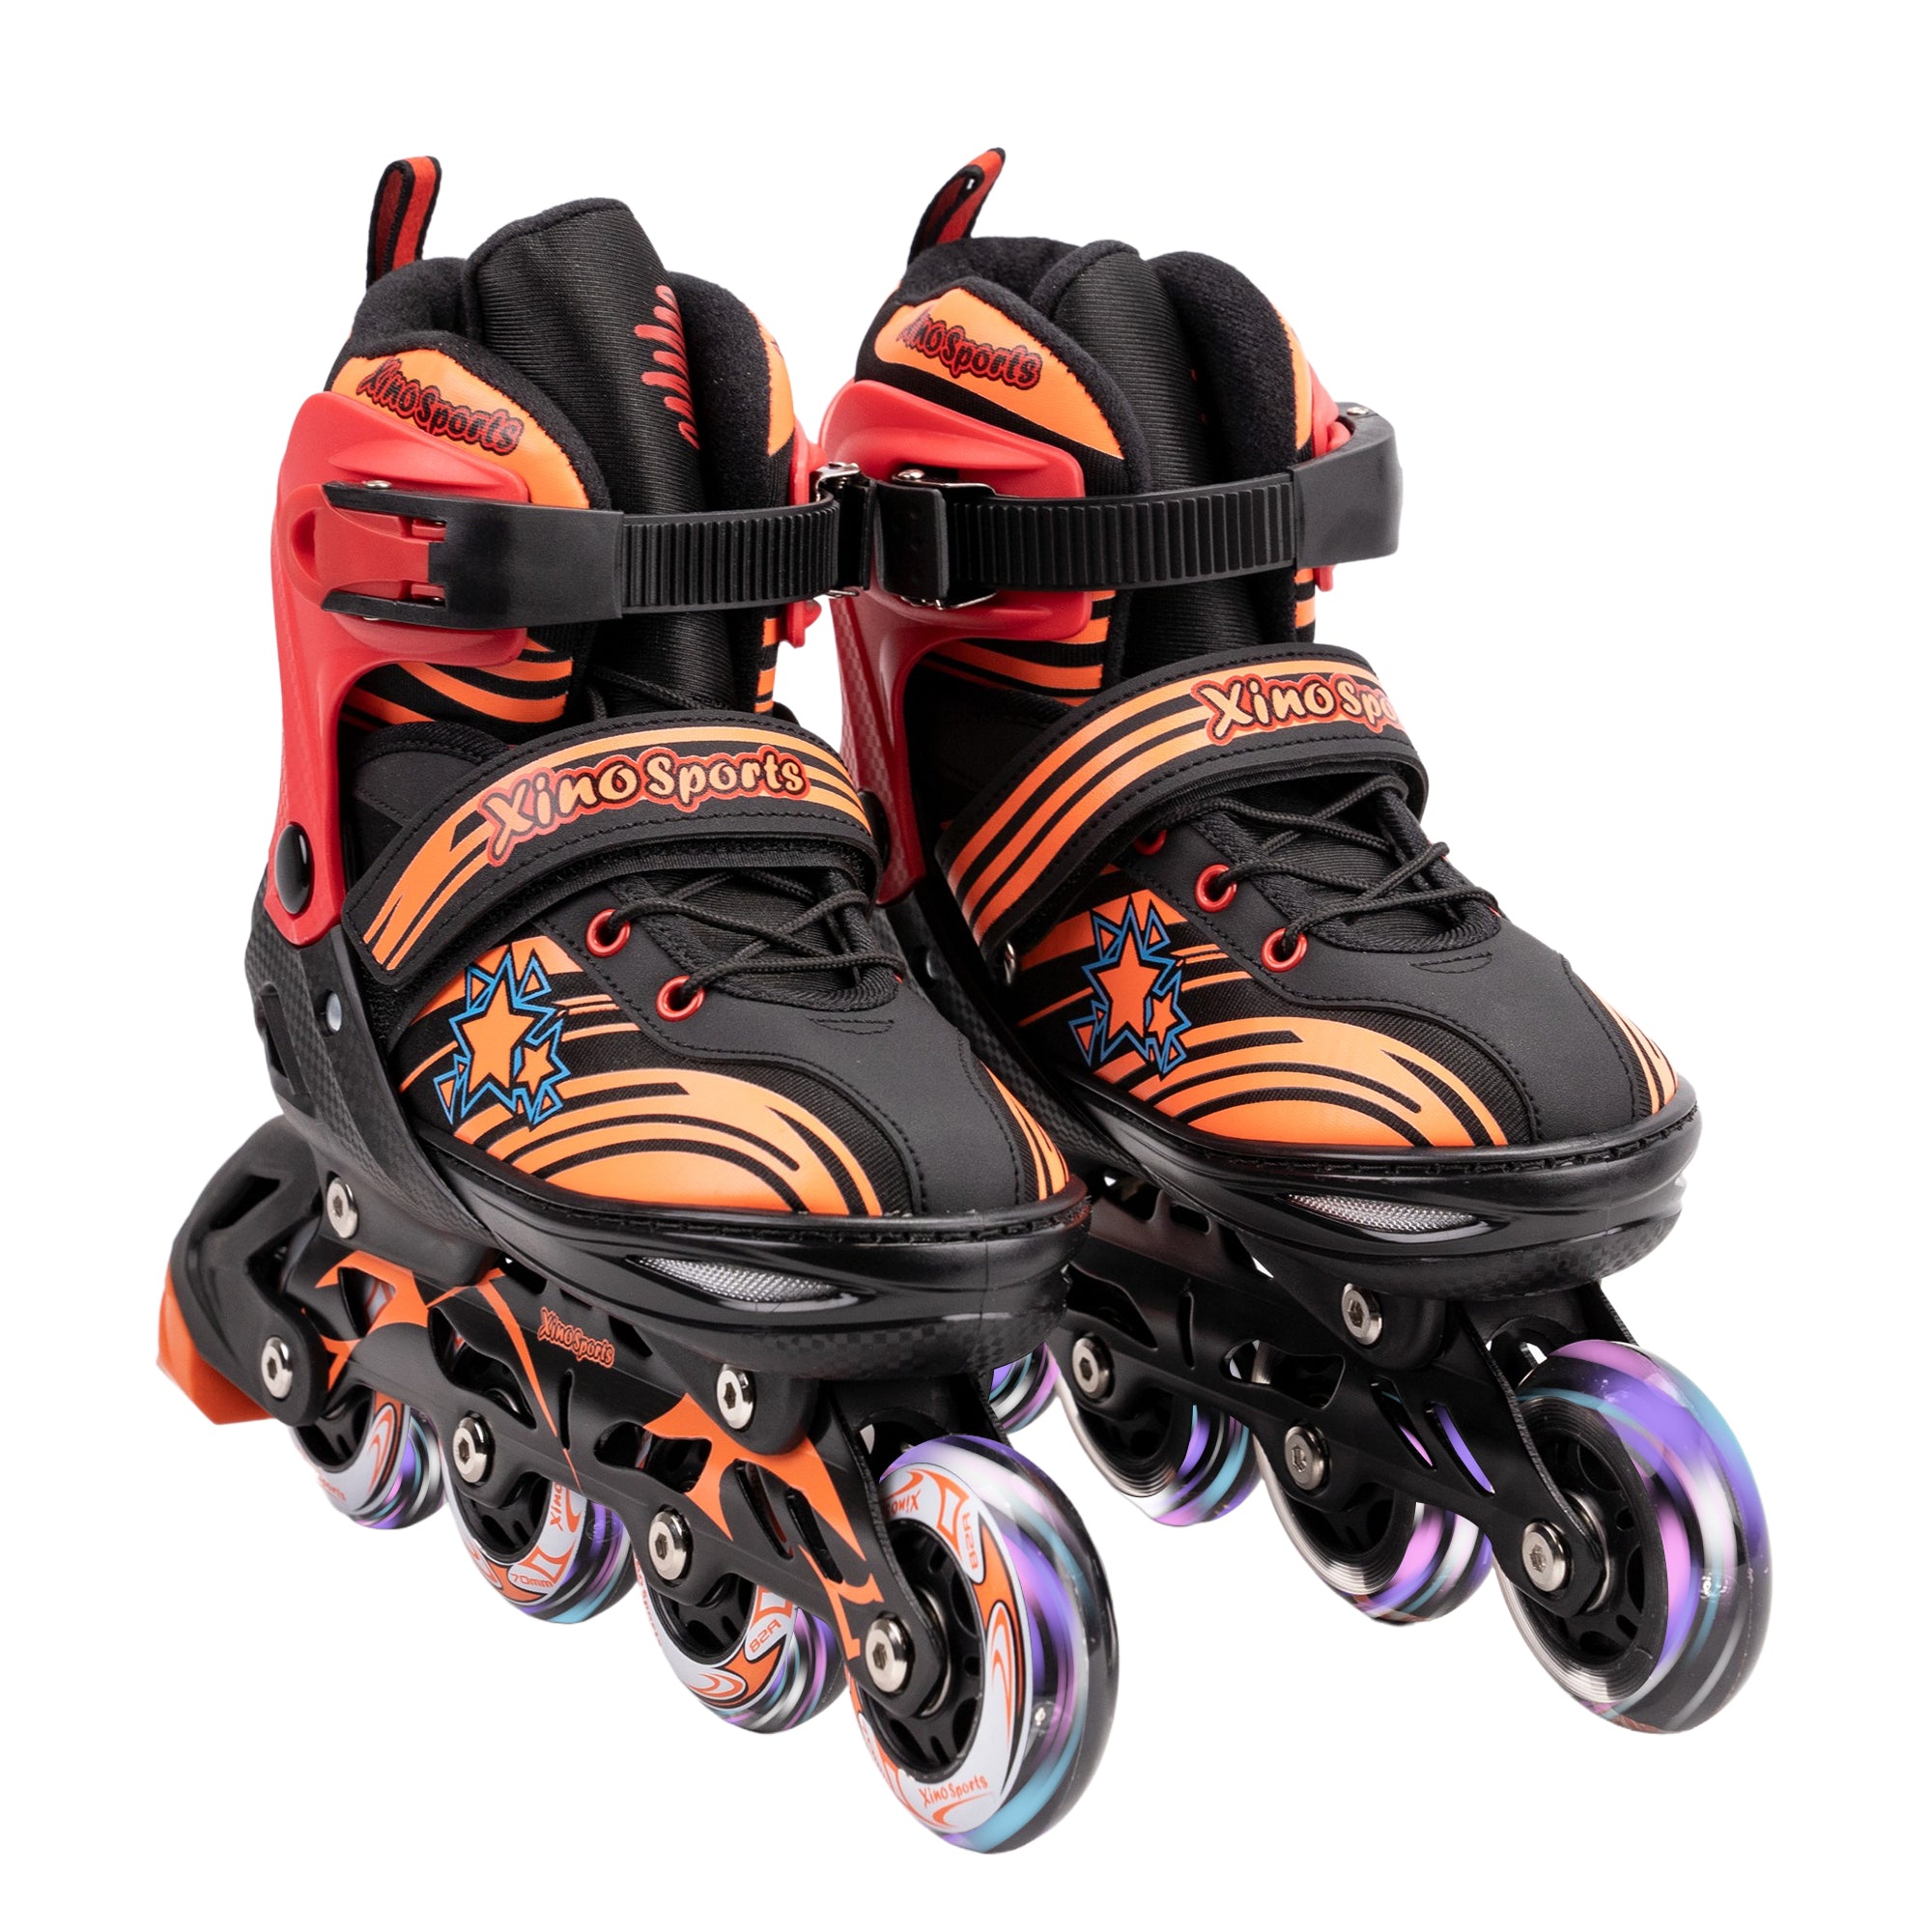  Kids Roller Skates and Roller Blades Combo - Xino Sports